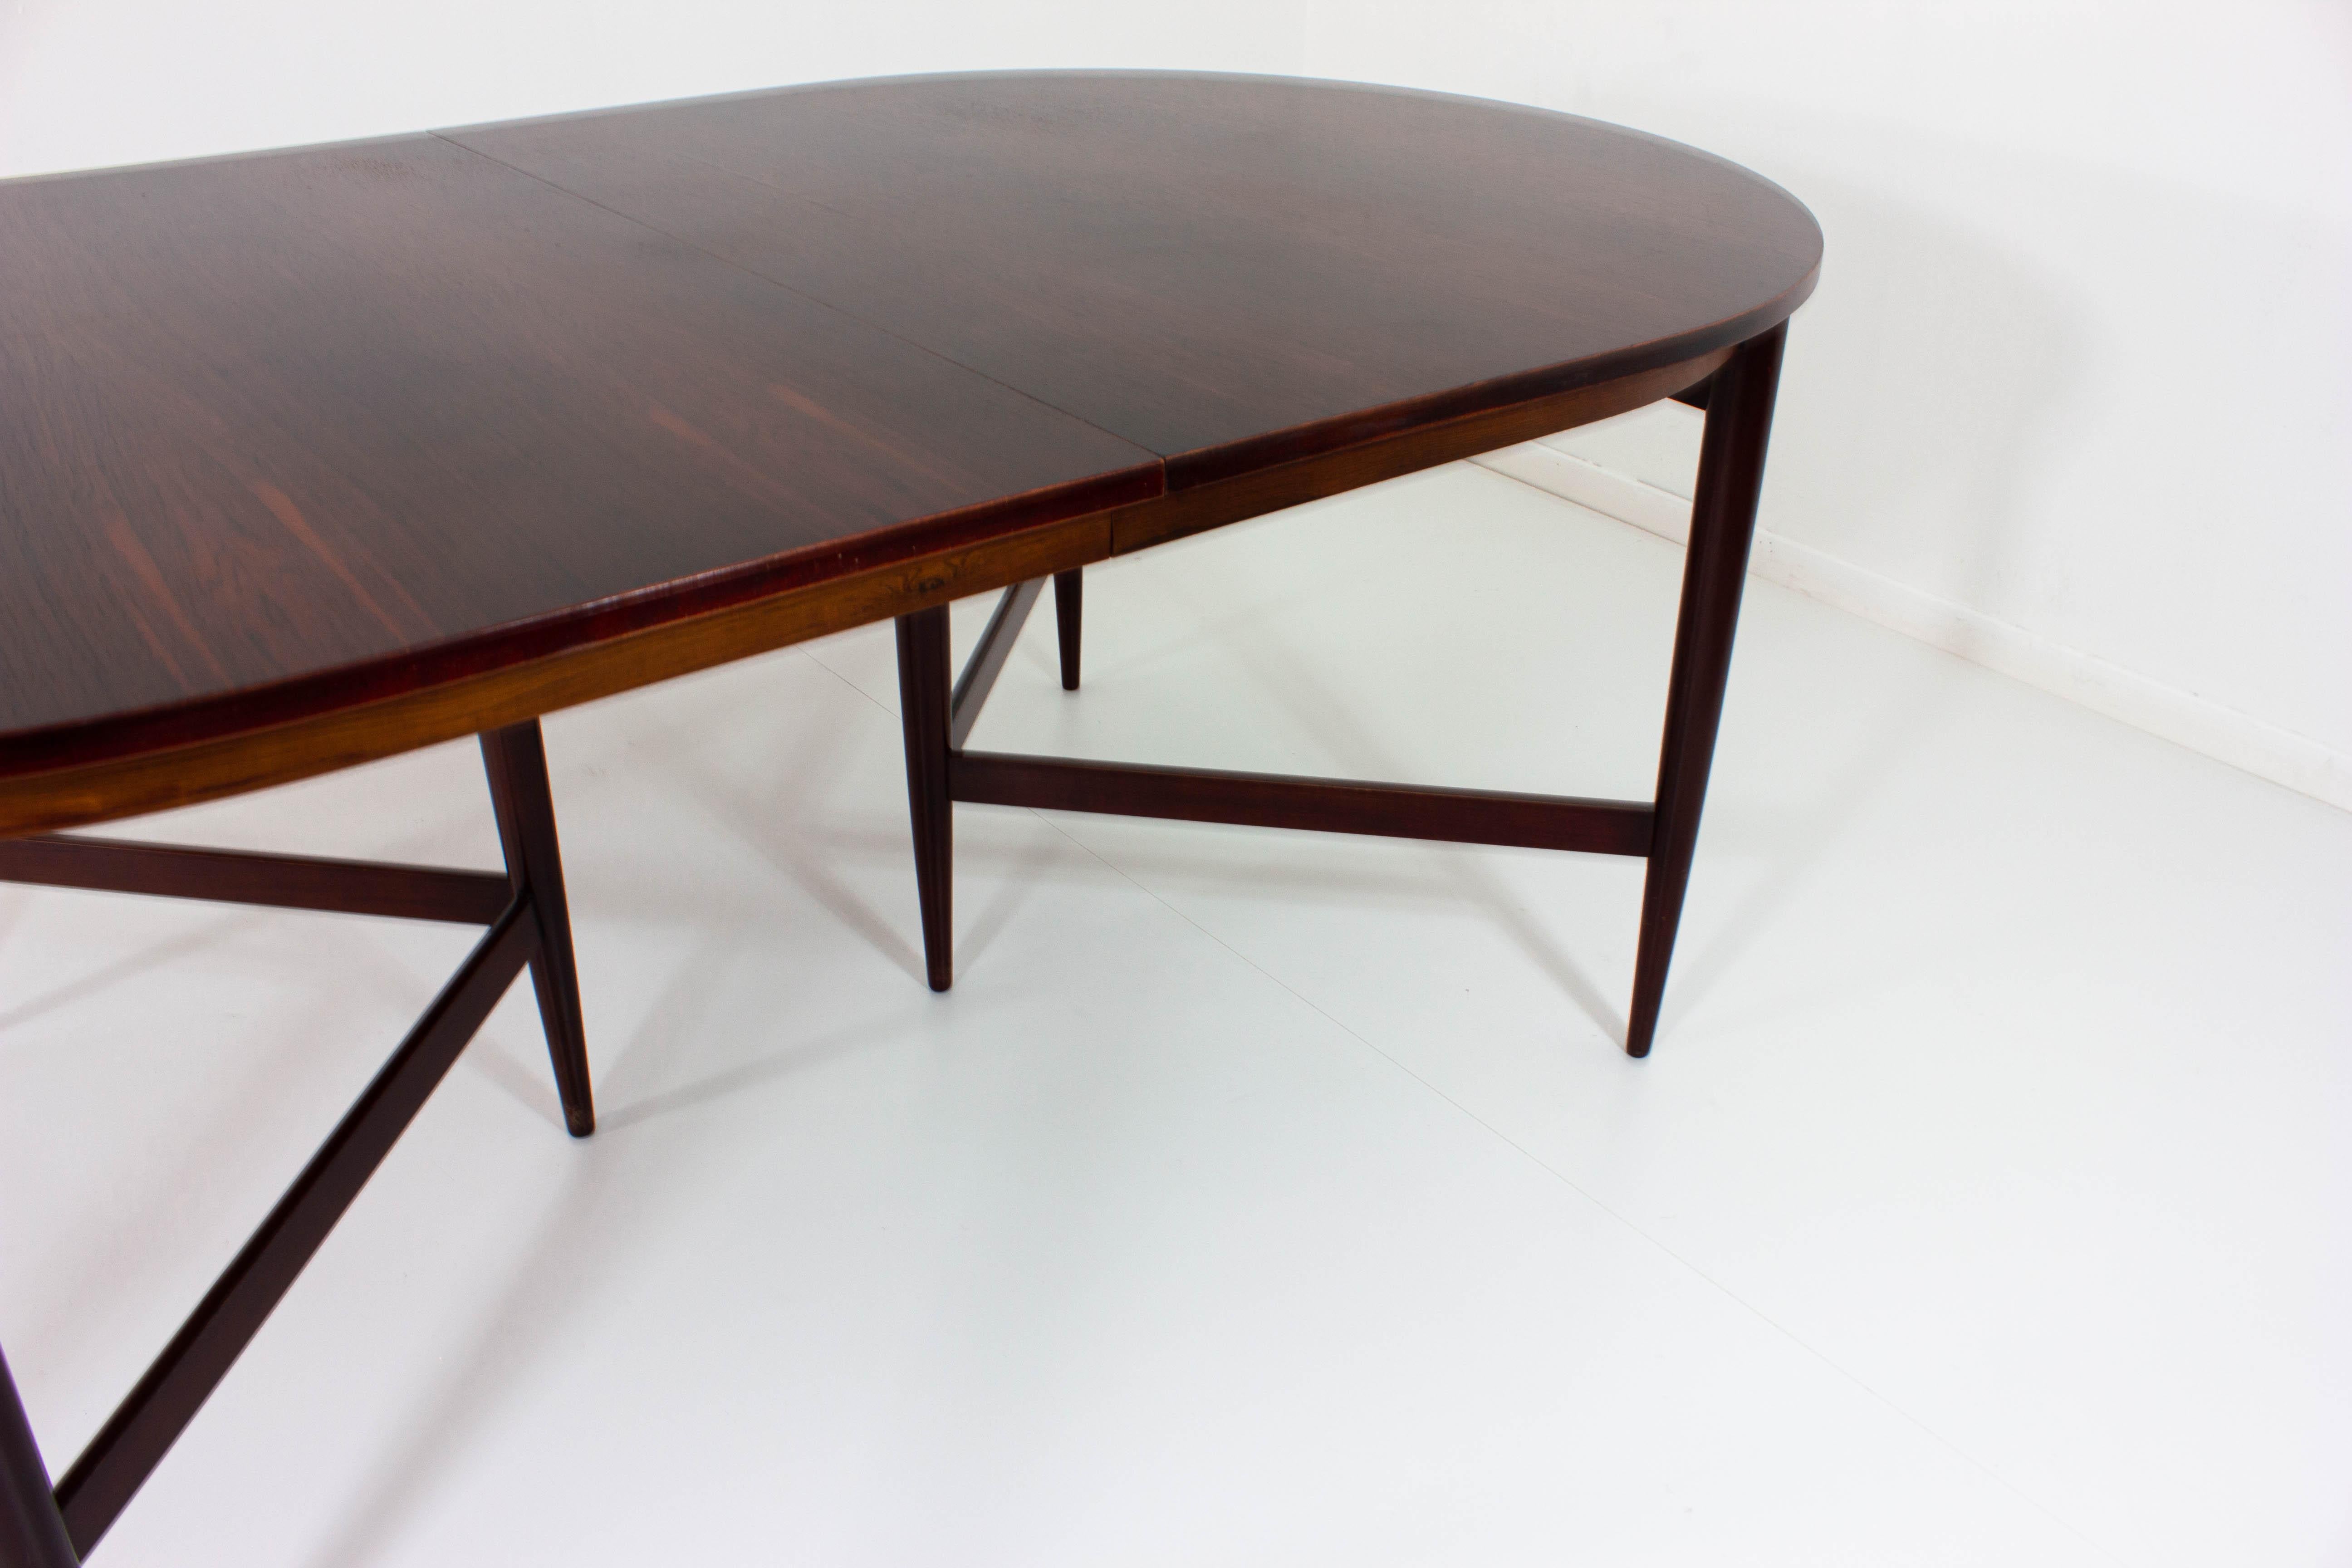 Mid-20th Century Rosewood Dining Table by Oswald Vermaercke, 1960s Belgium